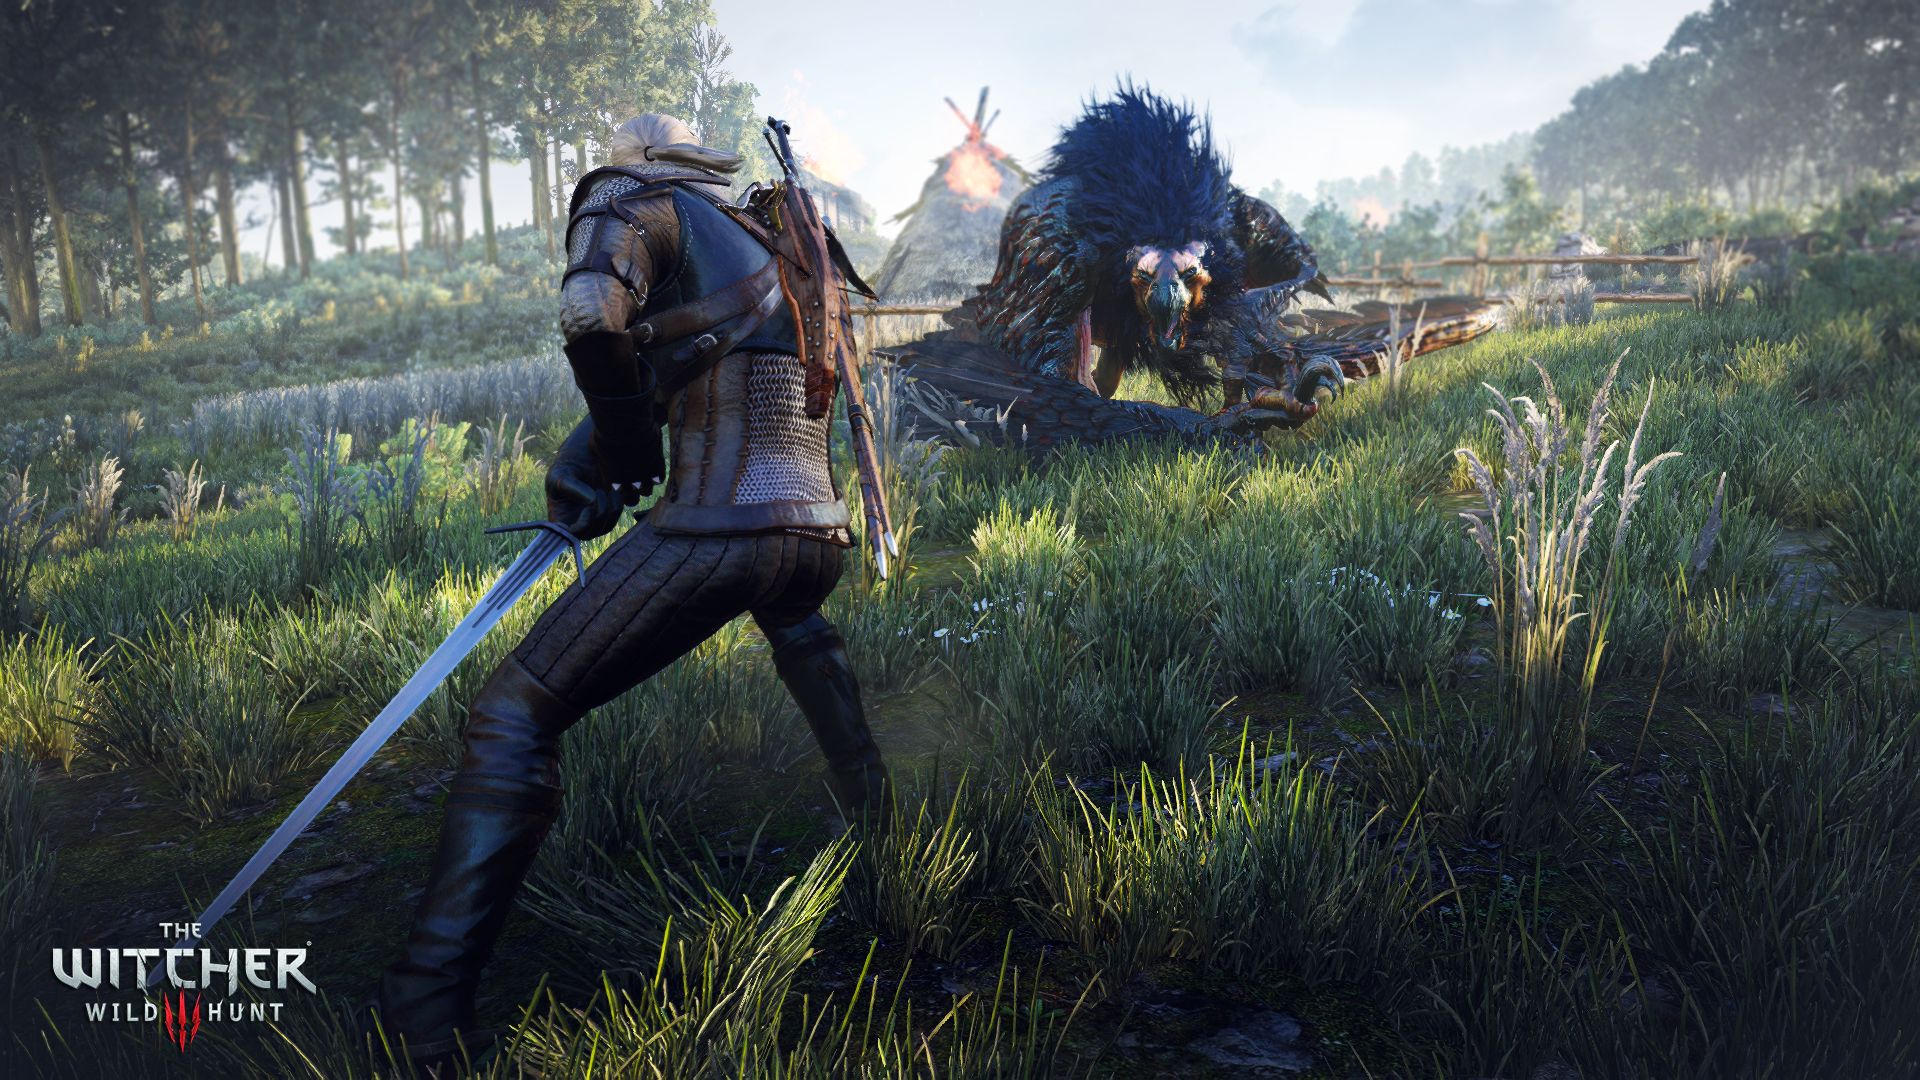 Une date de sortie pour THE WITCHER 3: WILD HUNT – GAME OF THE YEAR EDITION